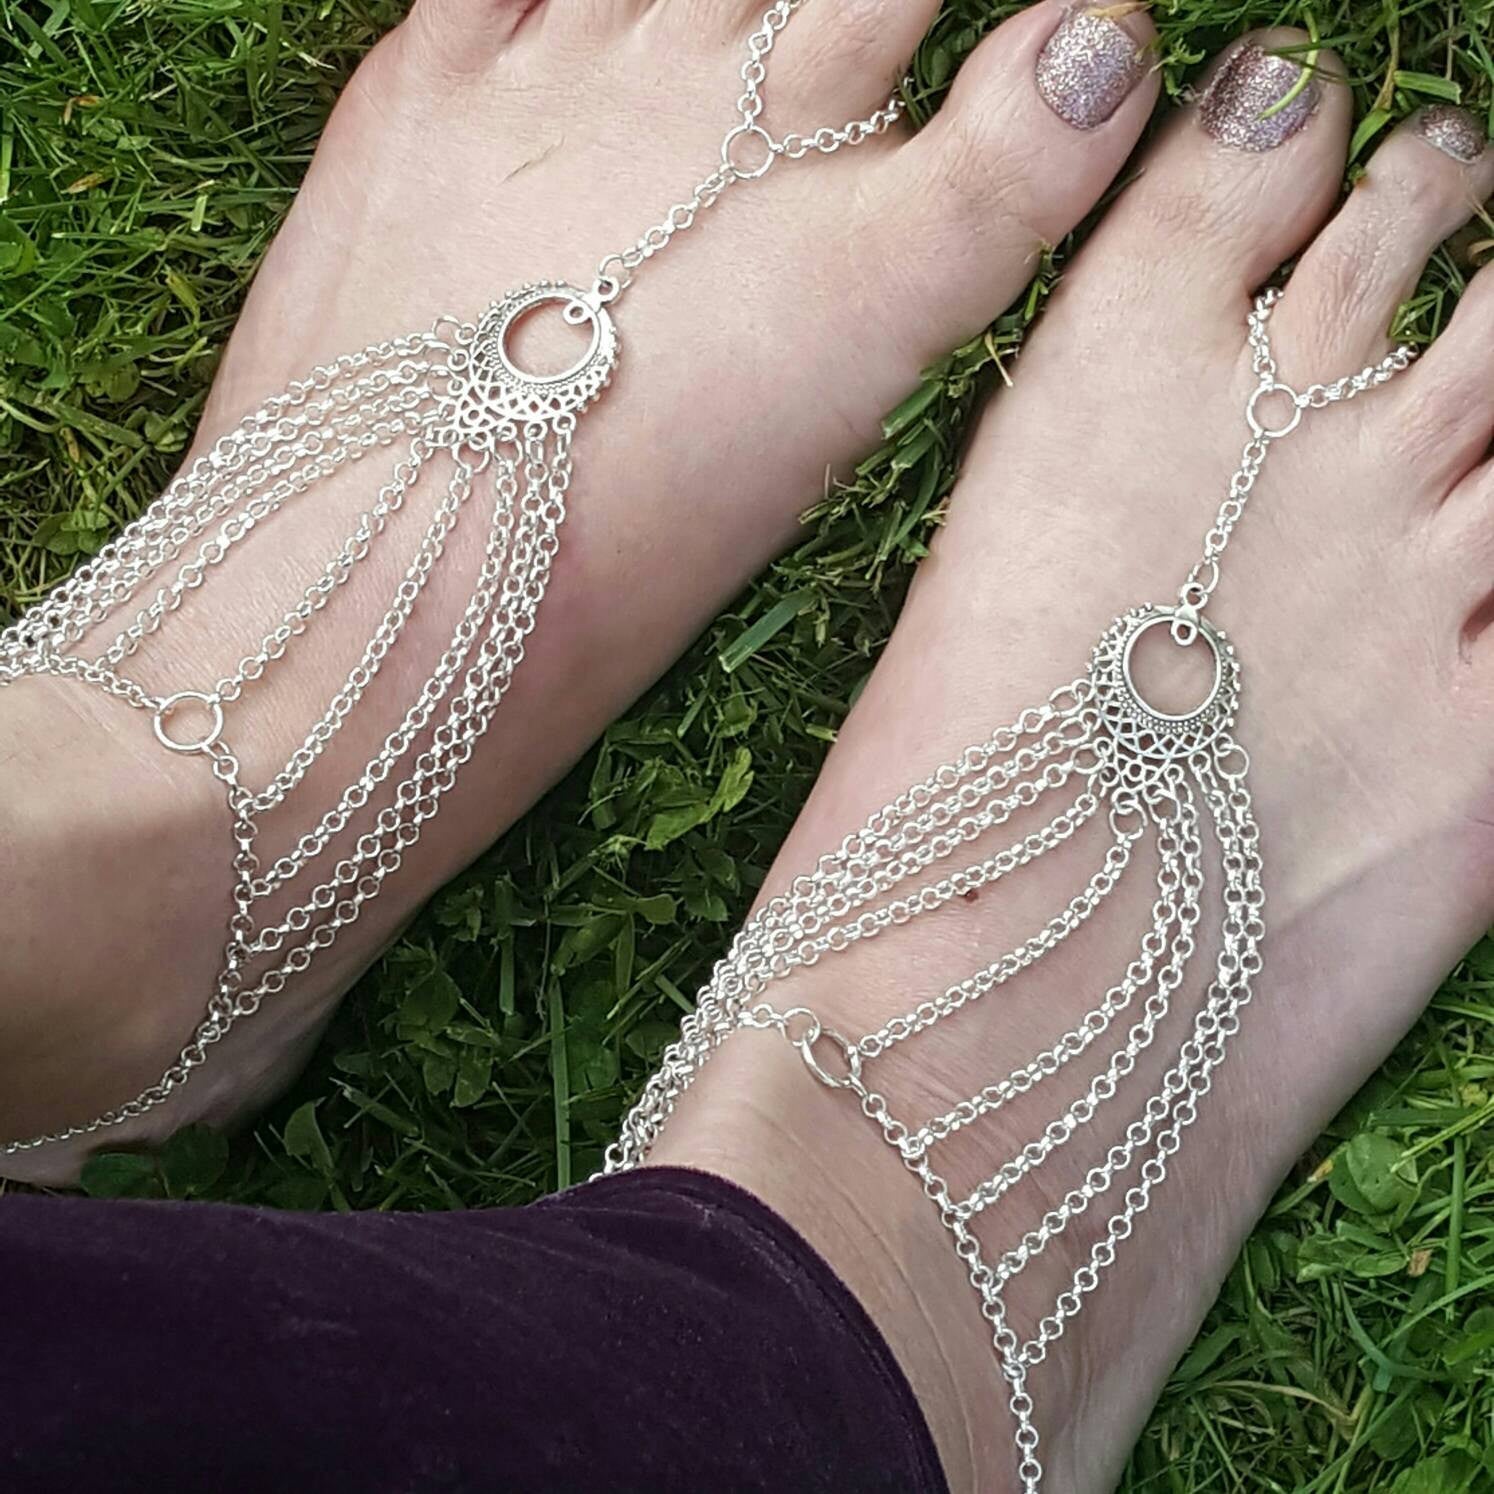 Barefoot Sandals Foot Slave Jewelry Slave Anklet Bohemian Jewelry - DRAVYNMOOR